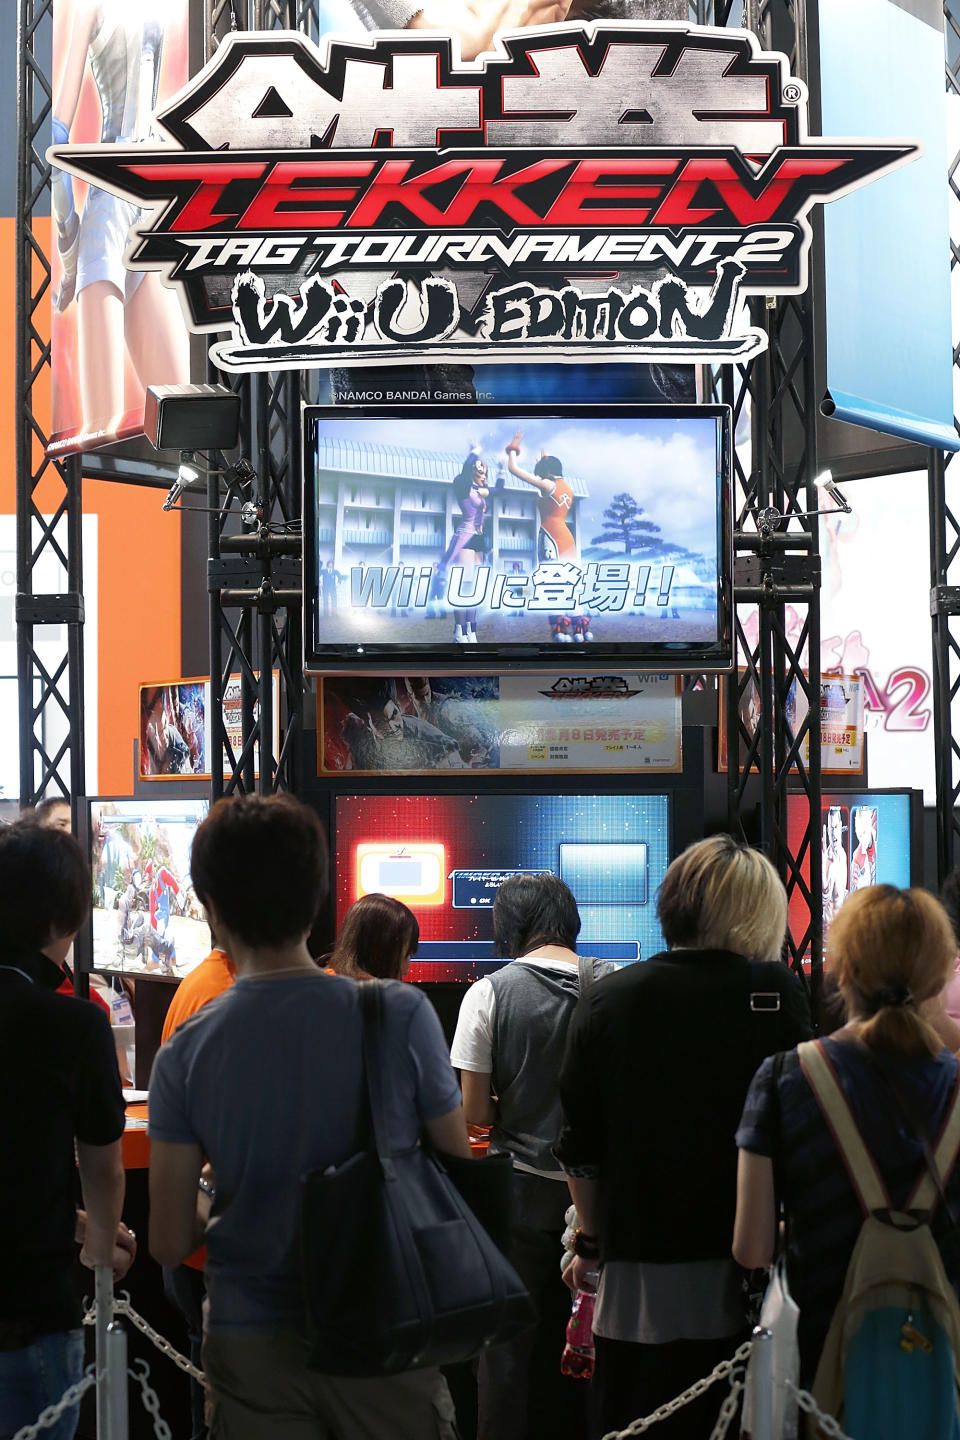 CHIBA, JAPAN - SEPTEMBER 20: Attendees wait in line to play Namco Bandai Games Inc.'s 'Tekken' with Nintendo Co.'s Wii U video game console during the Tokyo Game Show 2012 at Makuhari Messe on September 20, 2012 in Chiba, Japan. The annual video game expo, which is held from September 20 to 23, attracts thousands of business visitors and the general public with exhibitions of the upcoming game software and latest hardware. (Photo by Kiyoshi Ota/Getty Images)